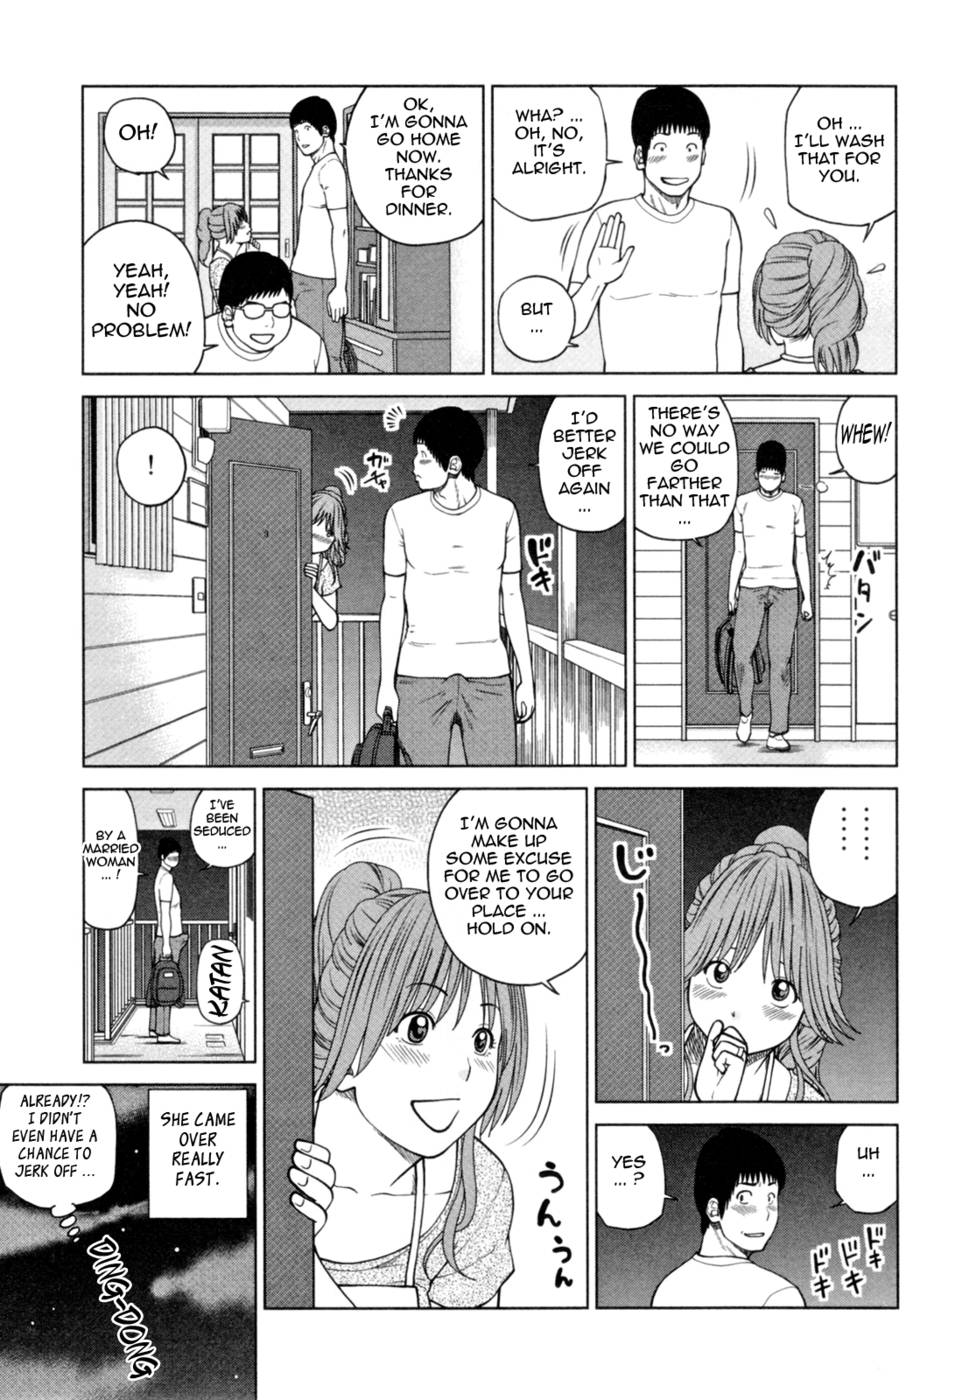 32 Year Old Unsatisfied Wife-Chapter 10-The Wife Next Door-Hentai Manga Hentai Comic photo photo pic